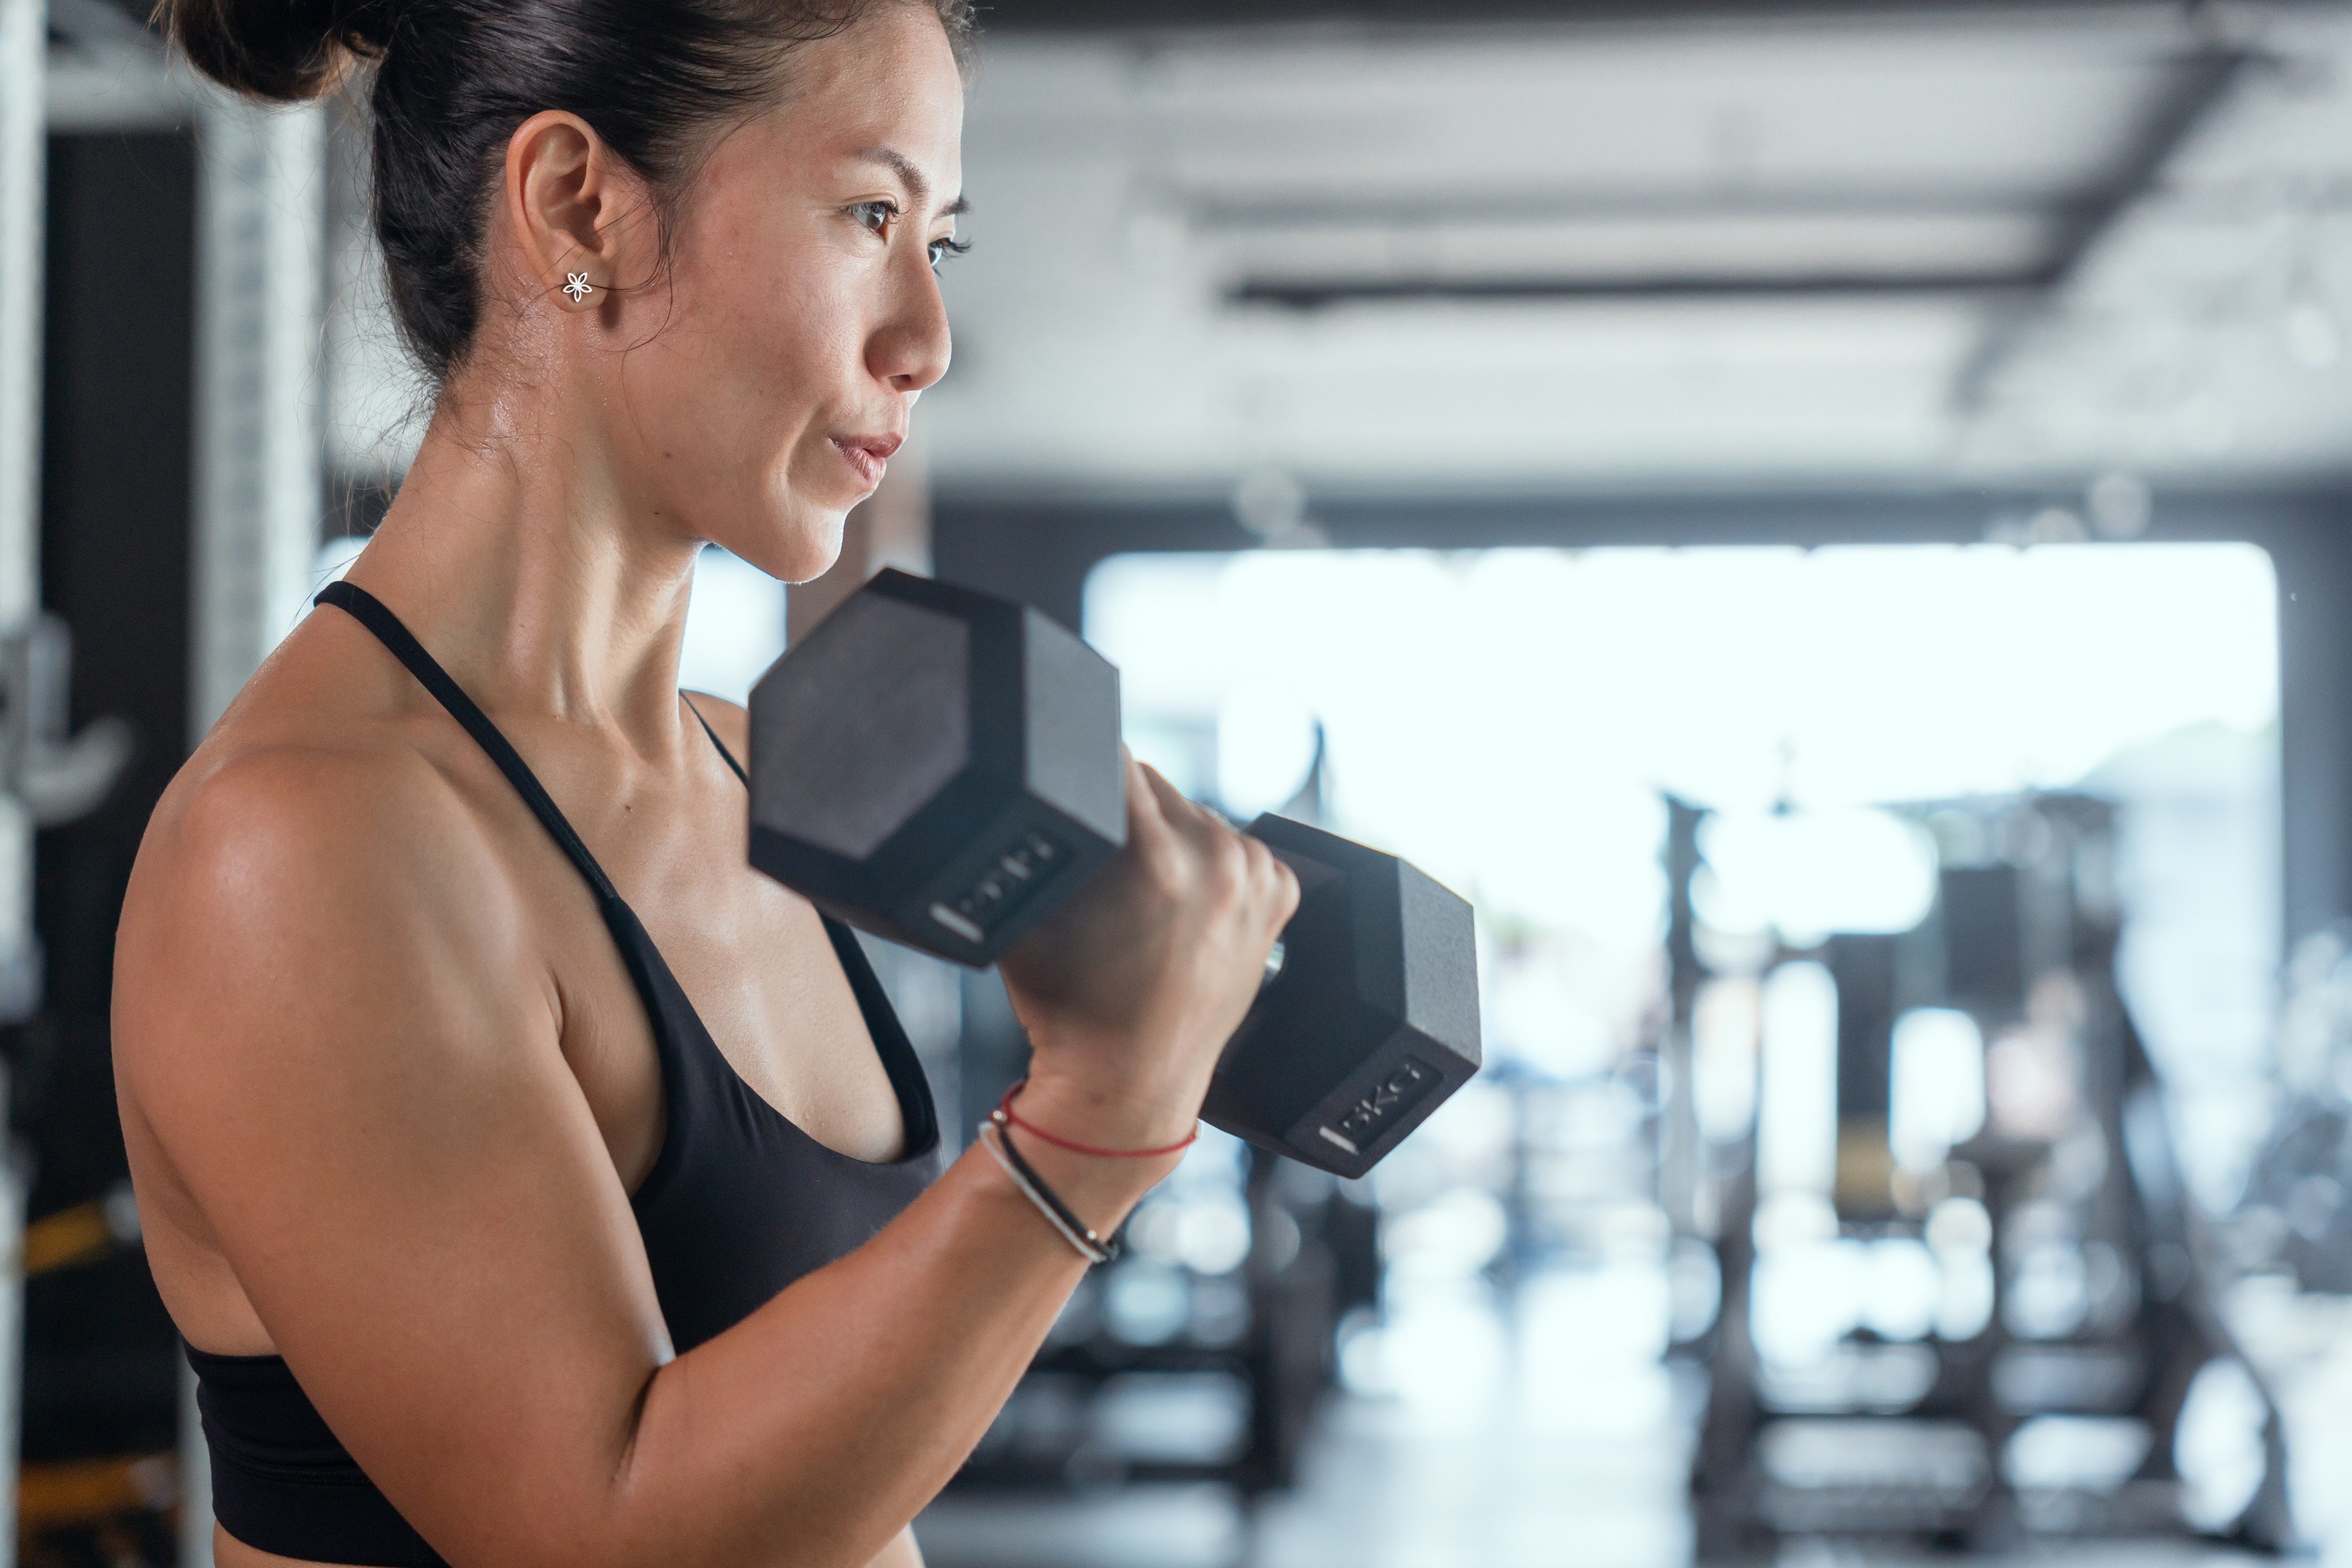 Strength training in the morning was one of several exercise routines the study suggested could benefit people before work. Photo: Shutterstock